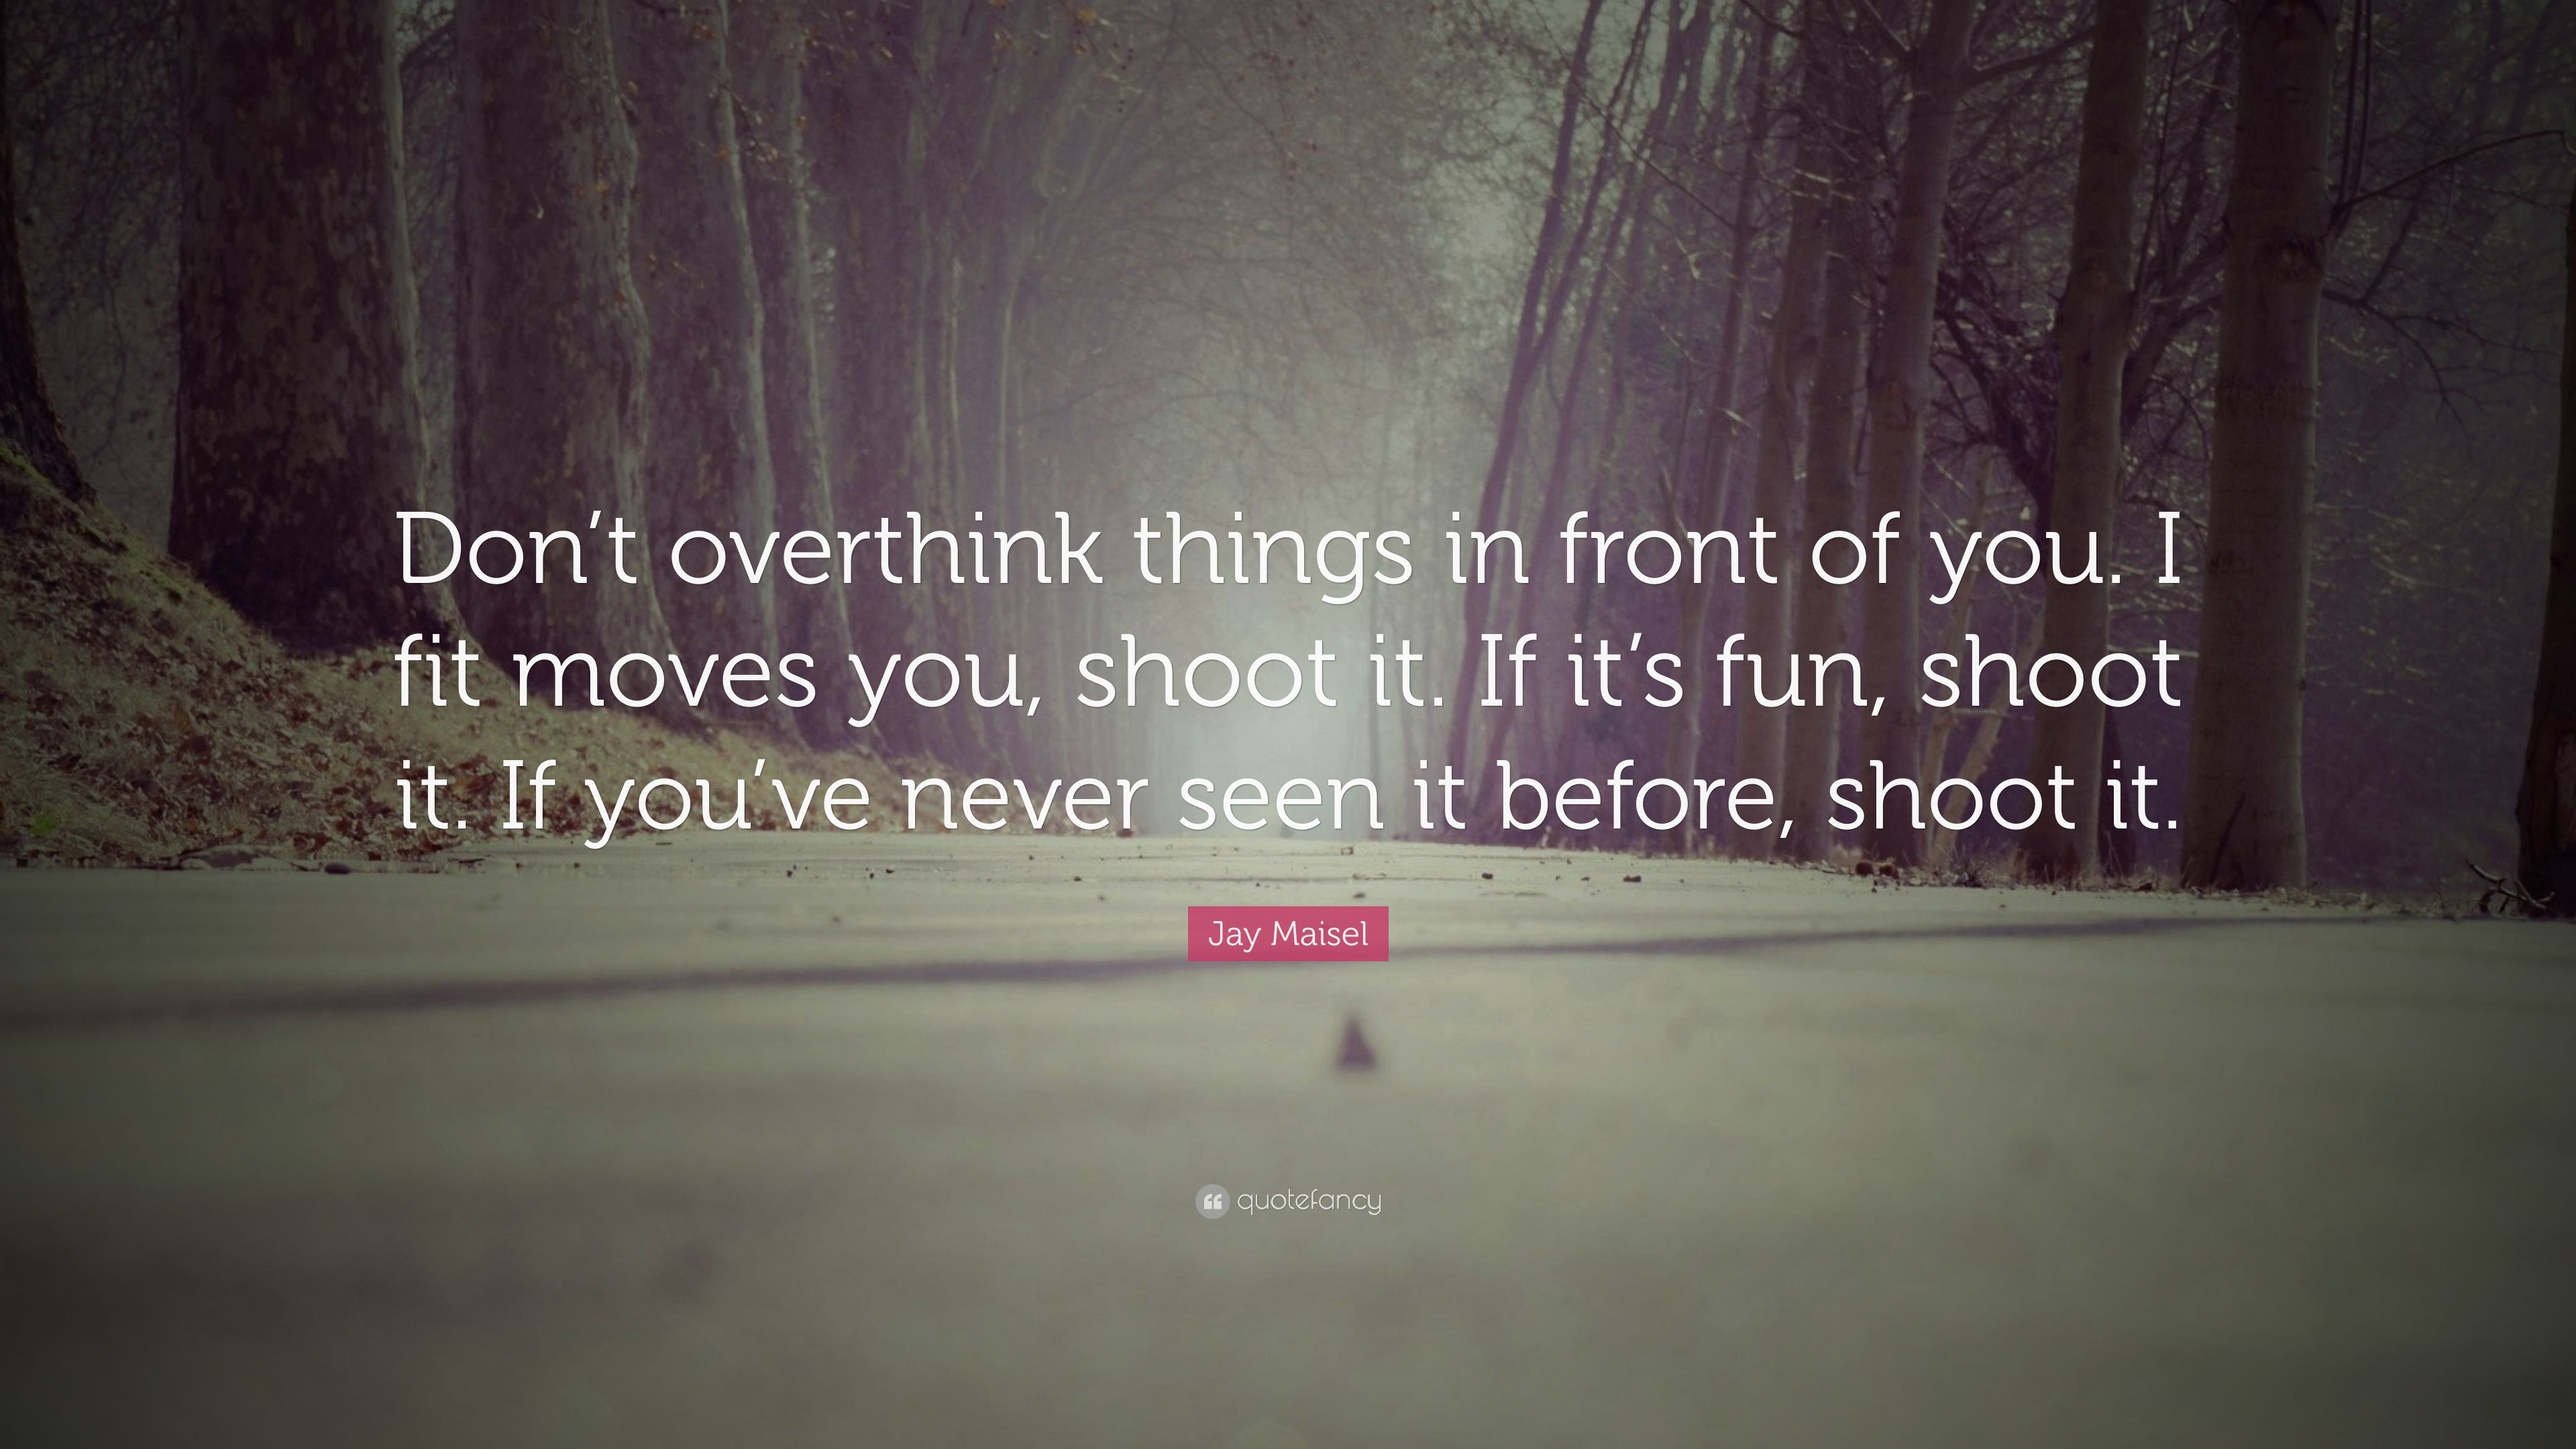 Jay Maisel Quote: “Don't overthink things in front of you. I fit